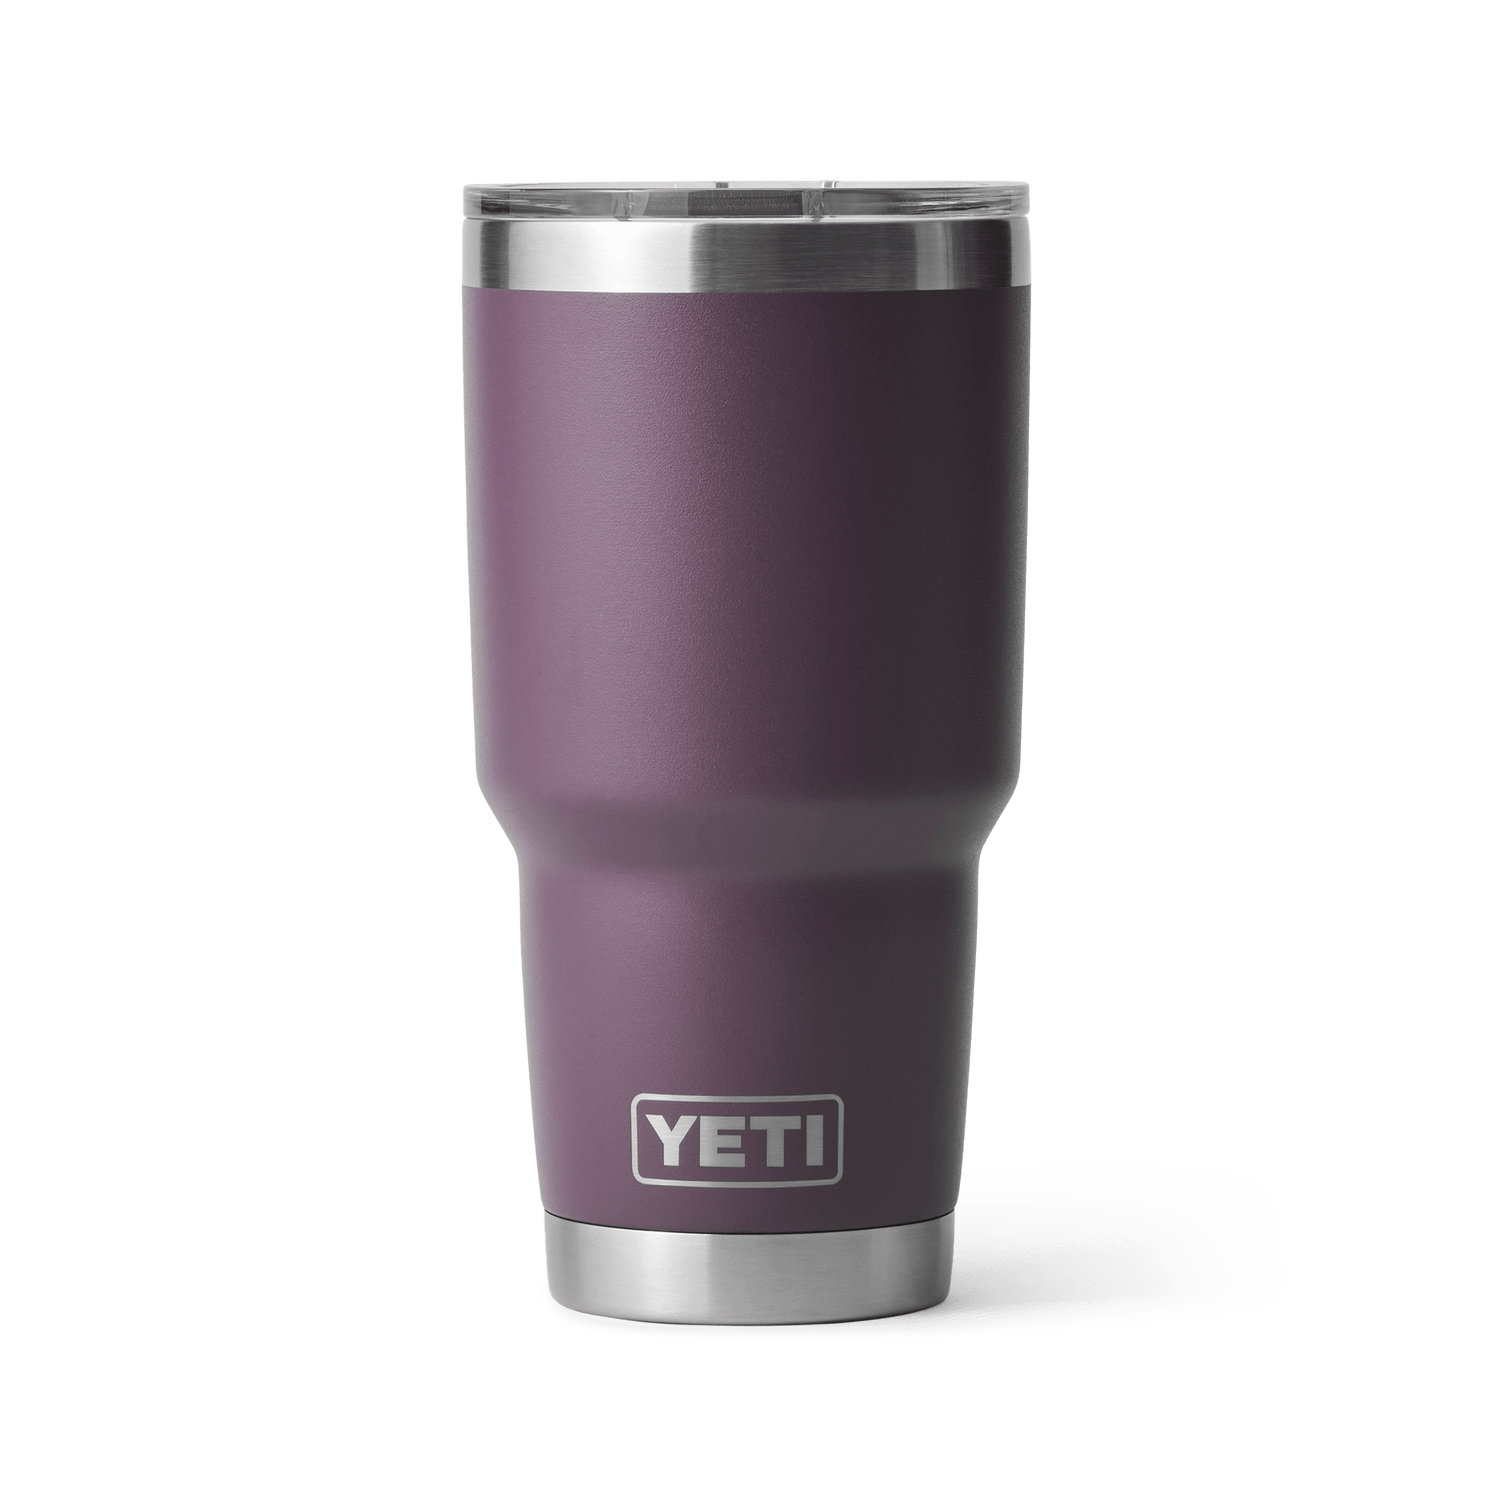 Yeti Rambler 30oz tumbler Thermo With Magnetic Lid for Sale in San